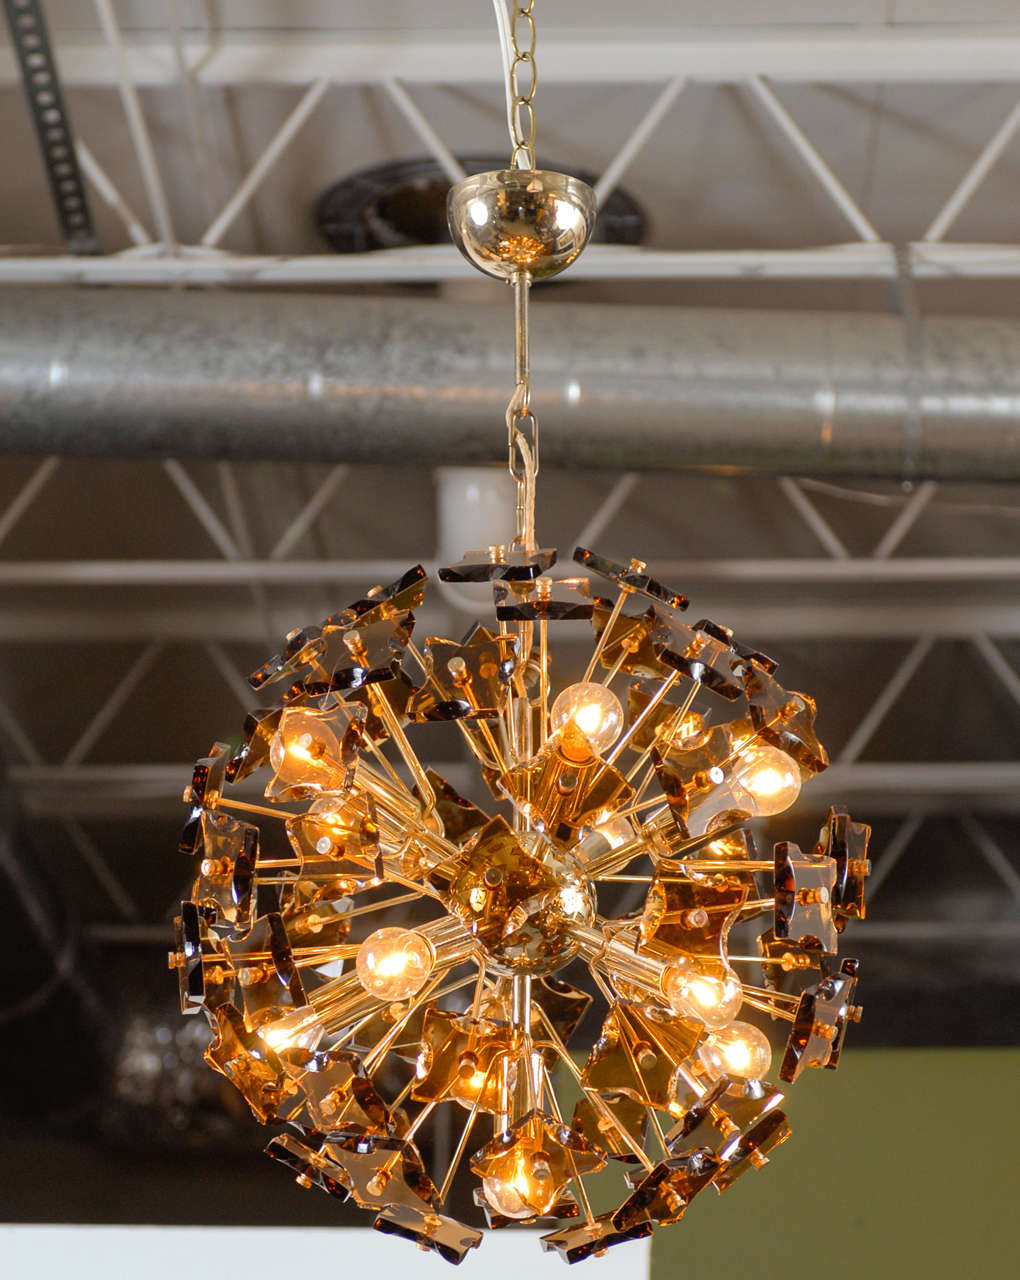 1960's brass Sputnik style chandelier with 60 randomly faceted smoked glass pieces surrounding 11 light bulbs.